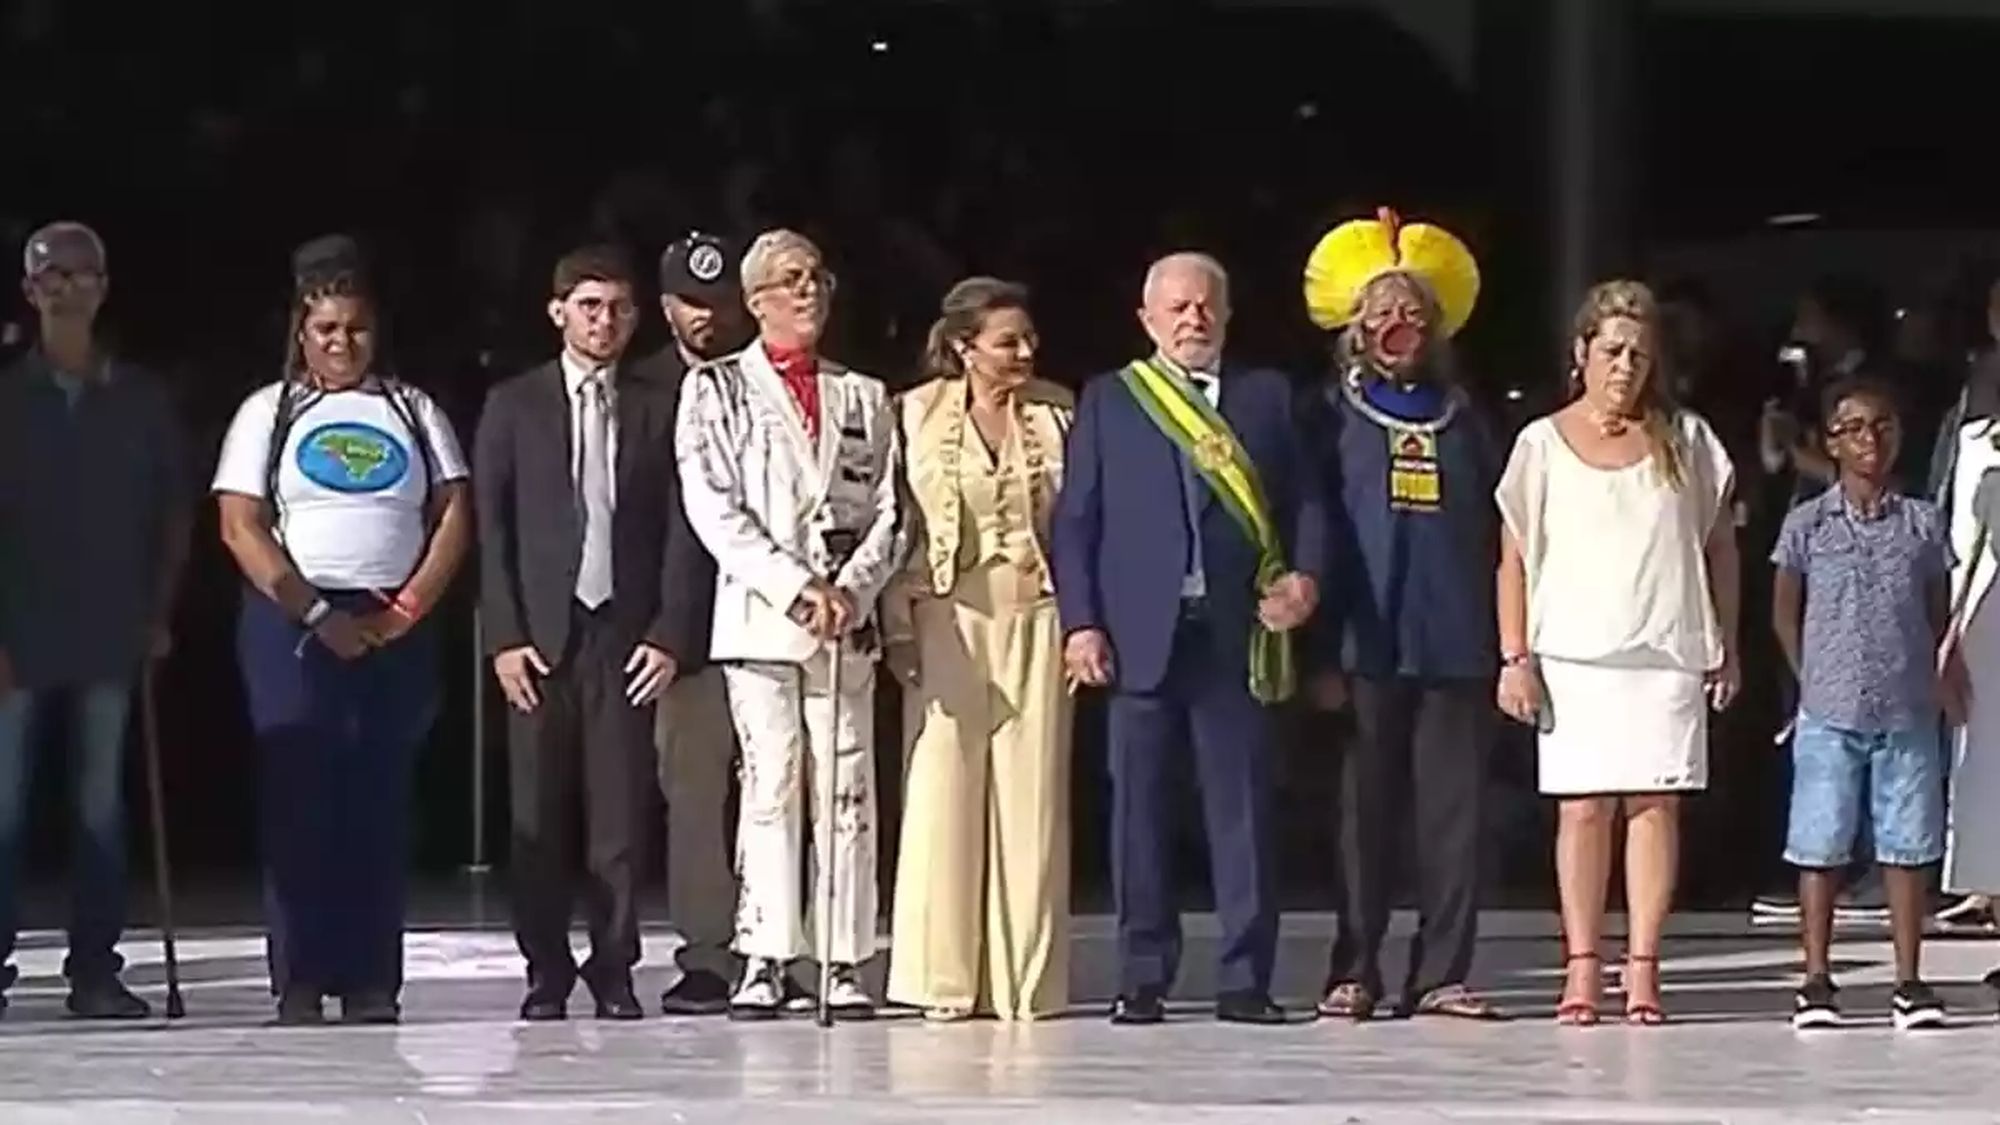 Lula walks up the Planalto palace ramp with his wife and a group that included Chief Raoni of the Kayapó tribe, a Black boy, and a trash pick up lady.